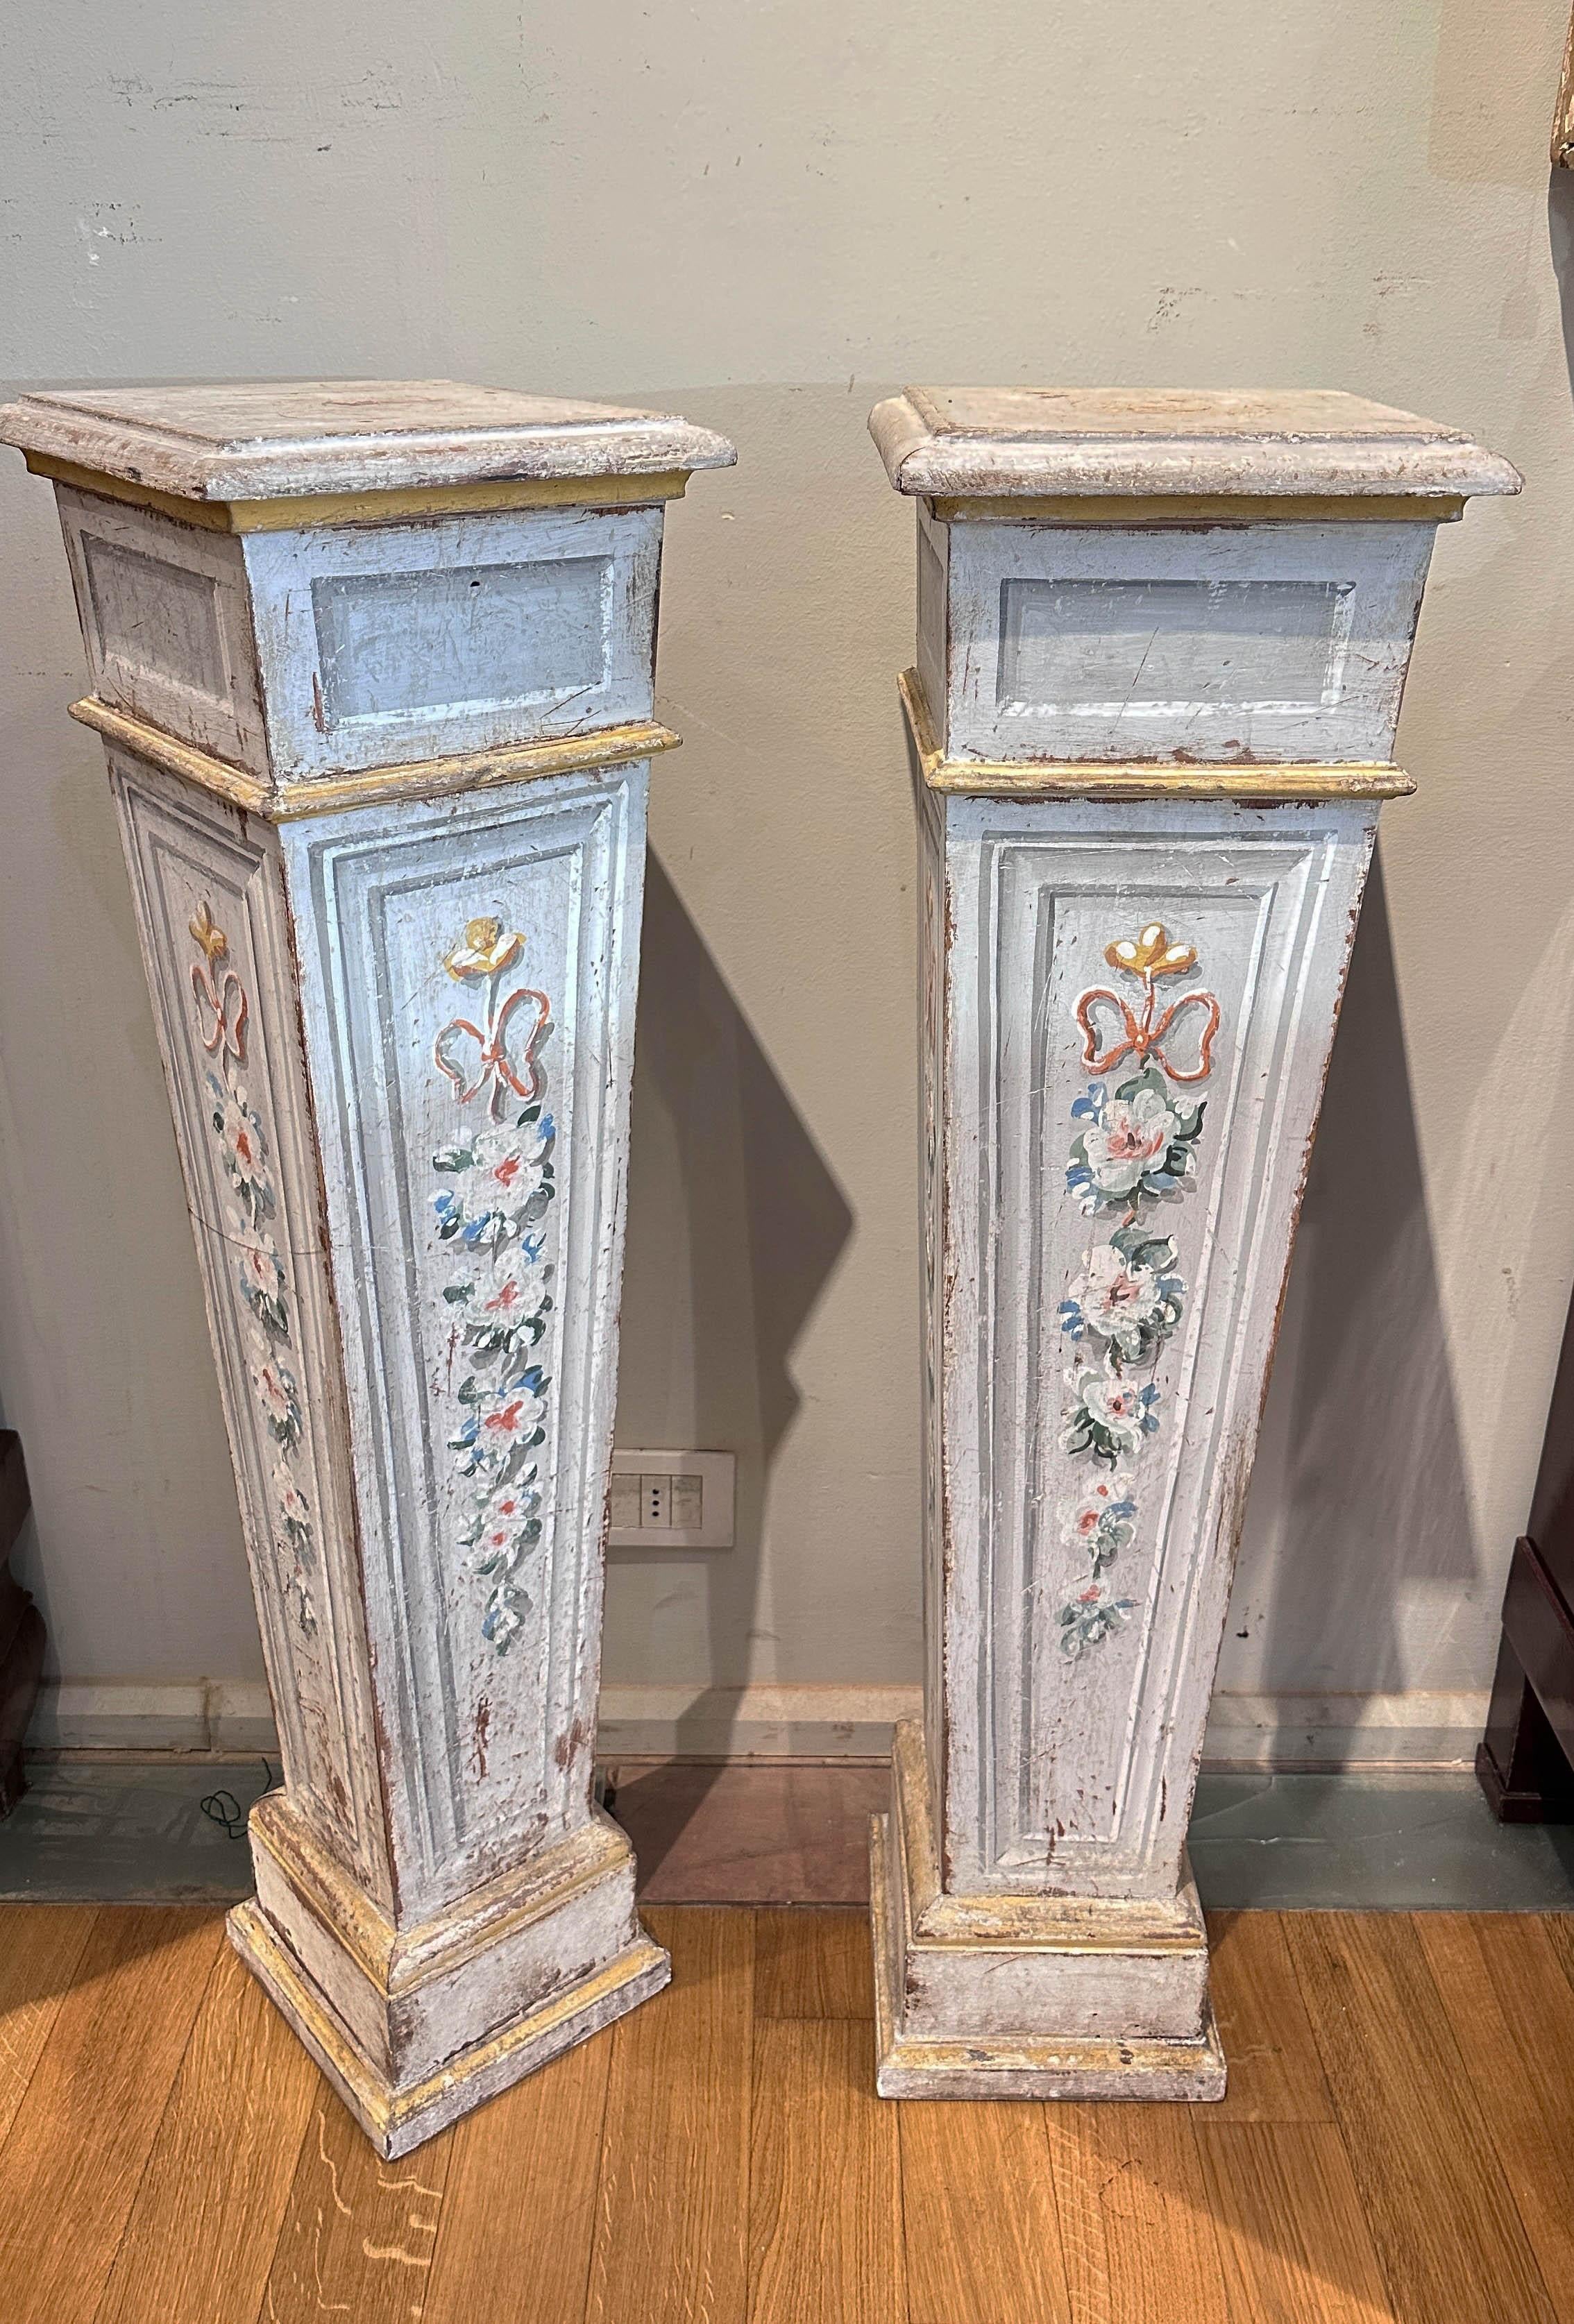 Italian 18th CENTURY PAINTED WOOD COLUMNS For Sale